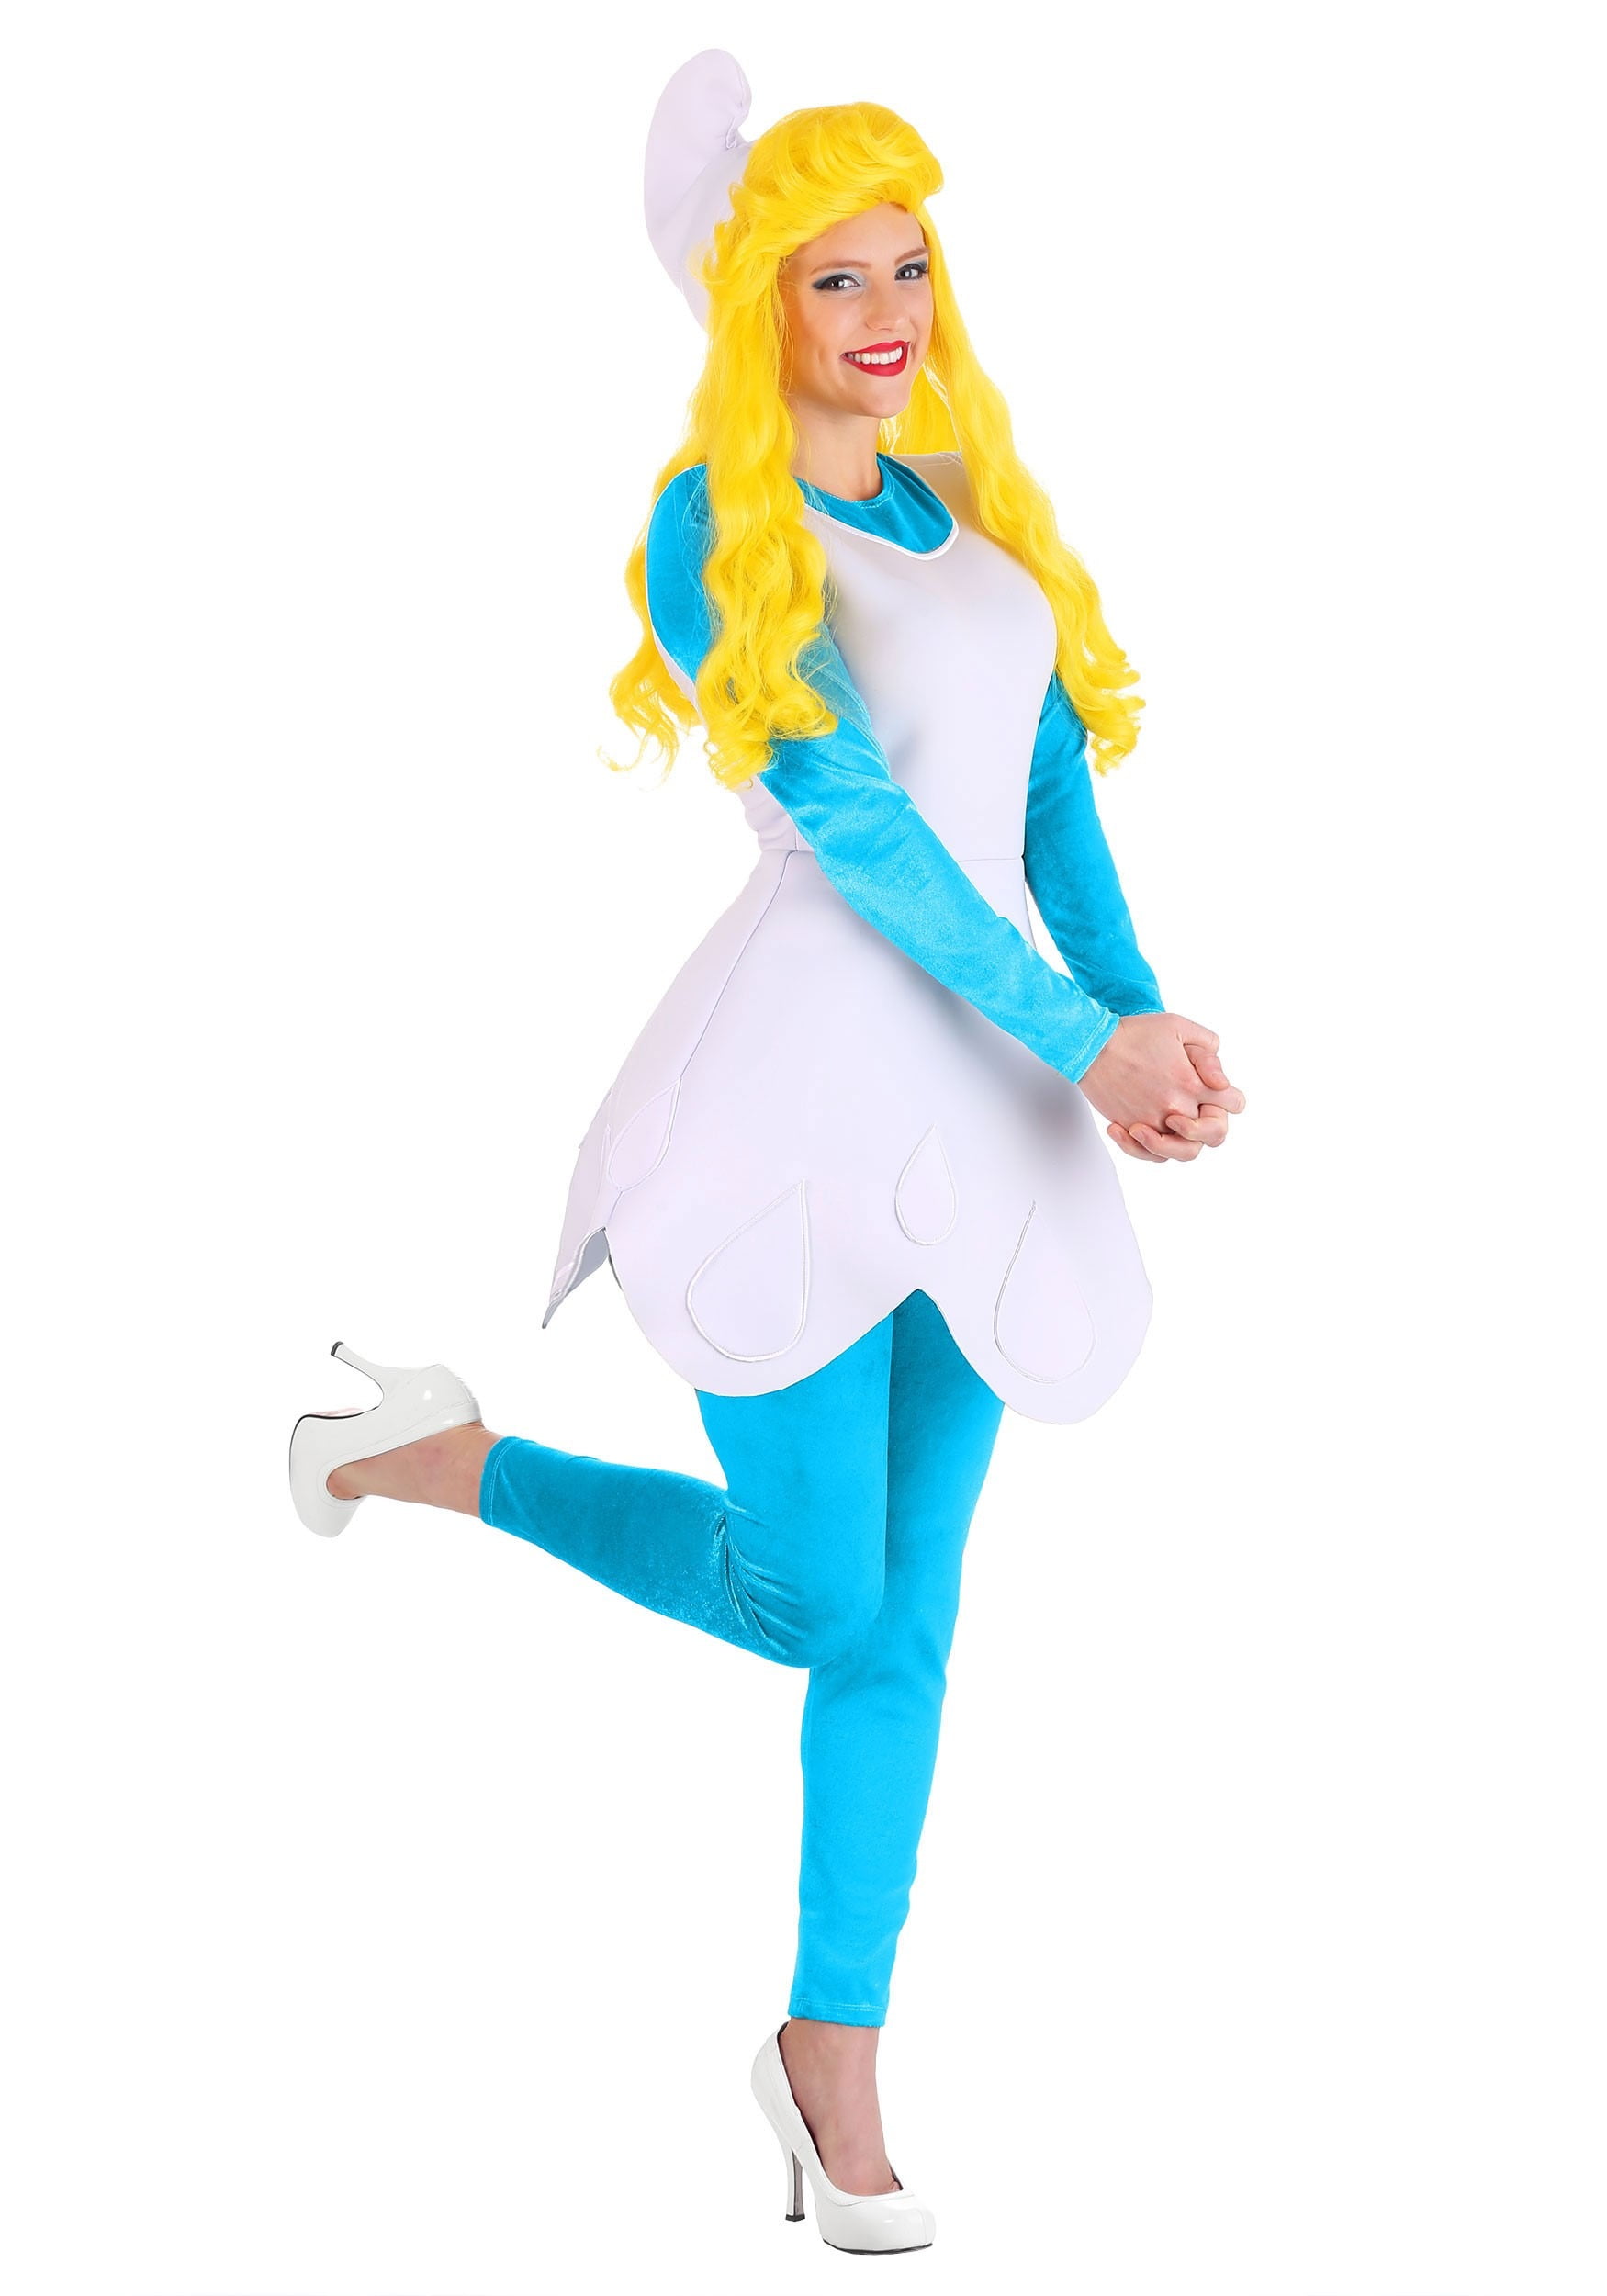 Fun Costumes Womens Smurfette Wig from The Smurfs Standard